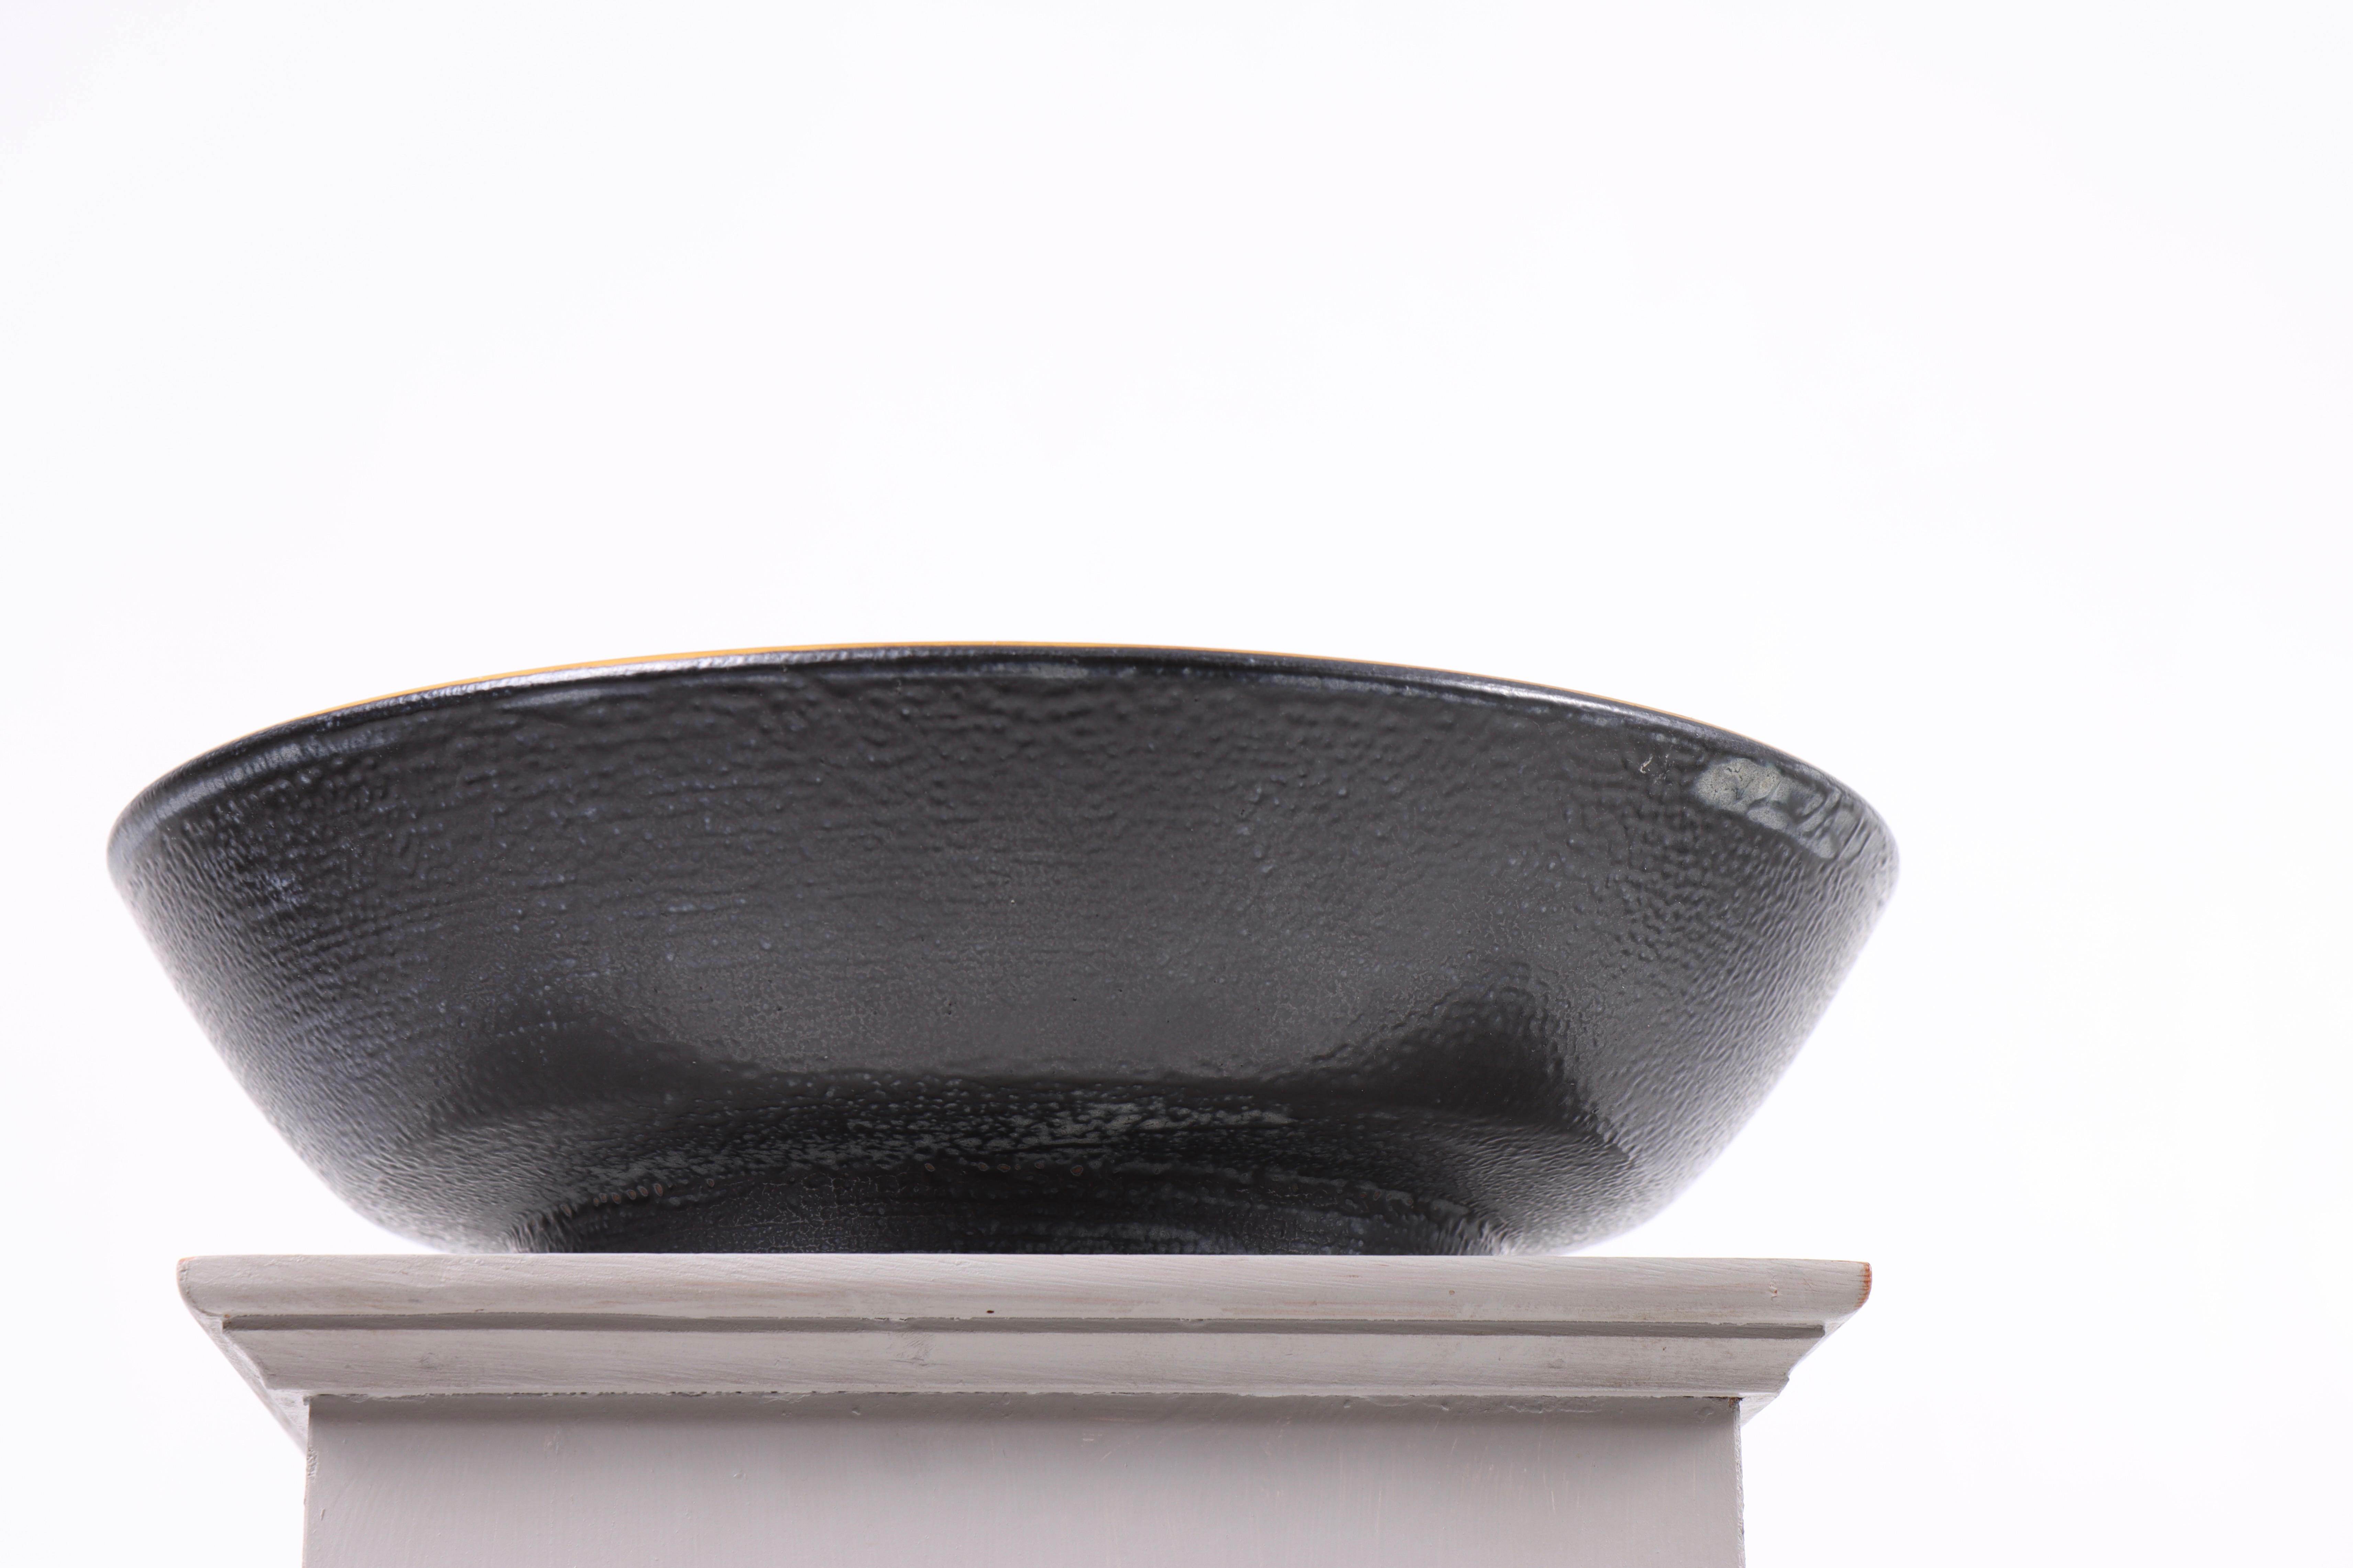 Scandinavian Modern Midcentury Large Bowl in Porcelain by Nils Thorsson, Denmark, 1960s For Sale